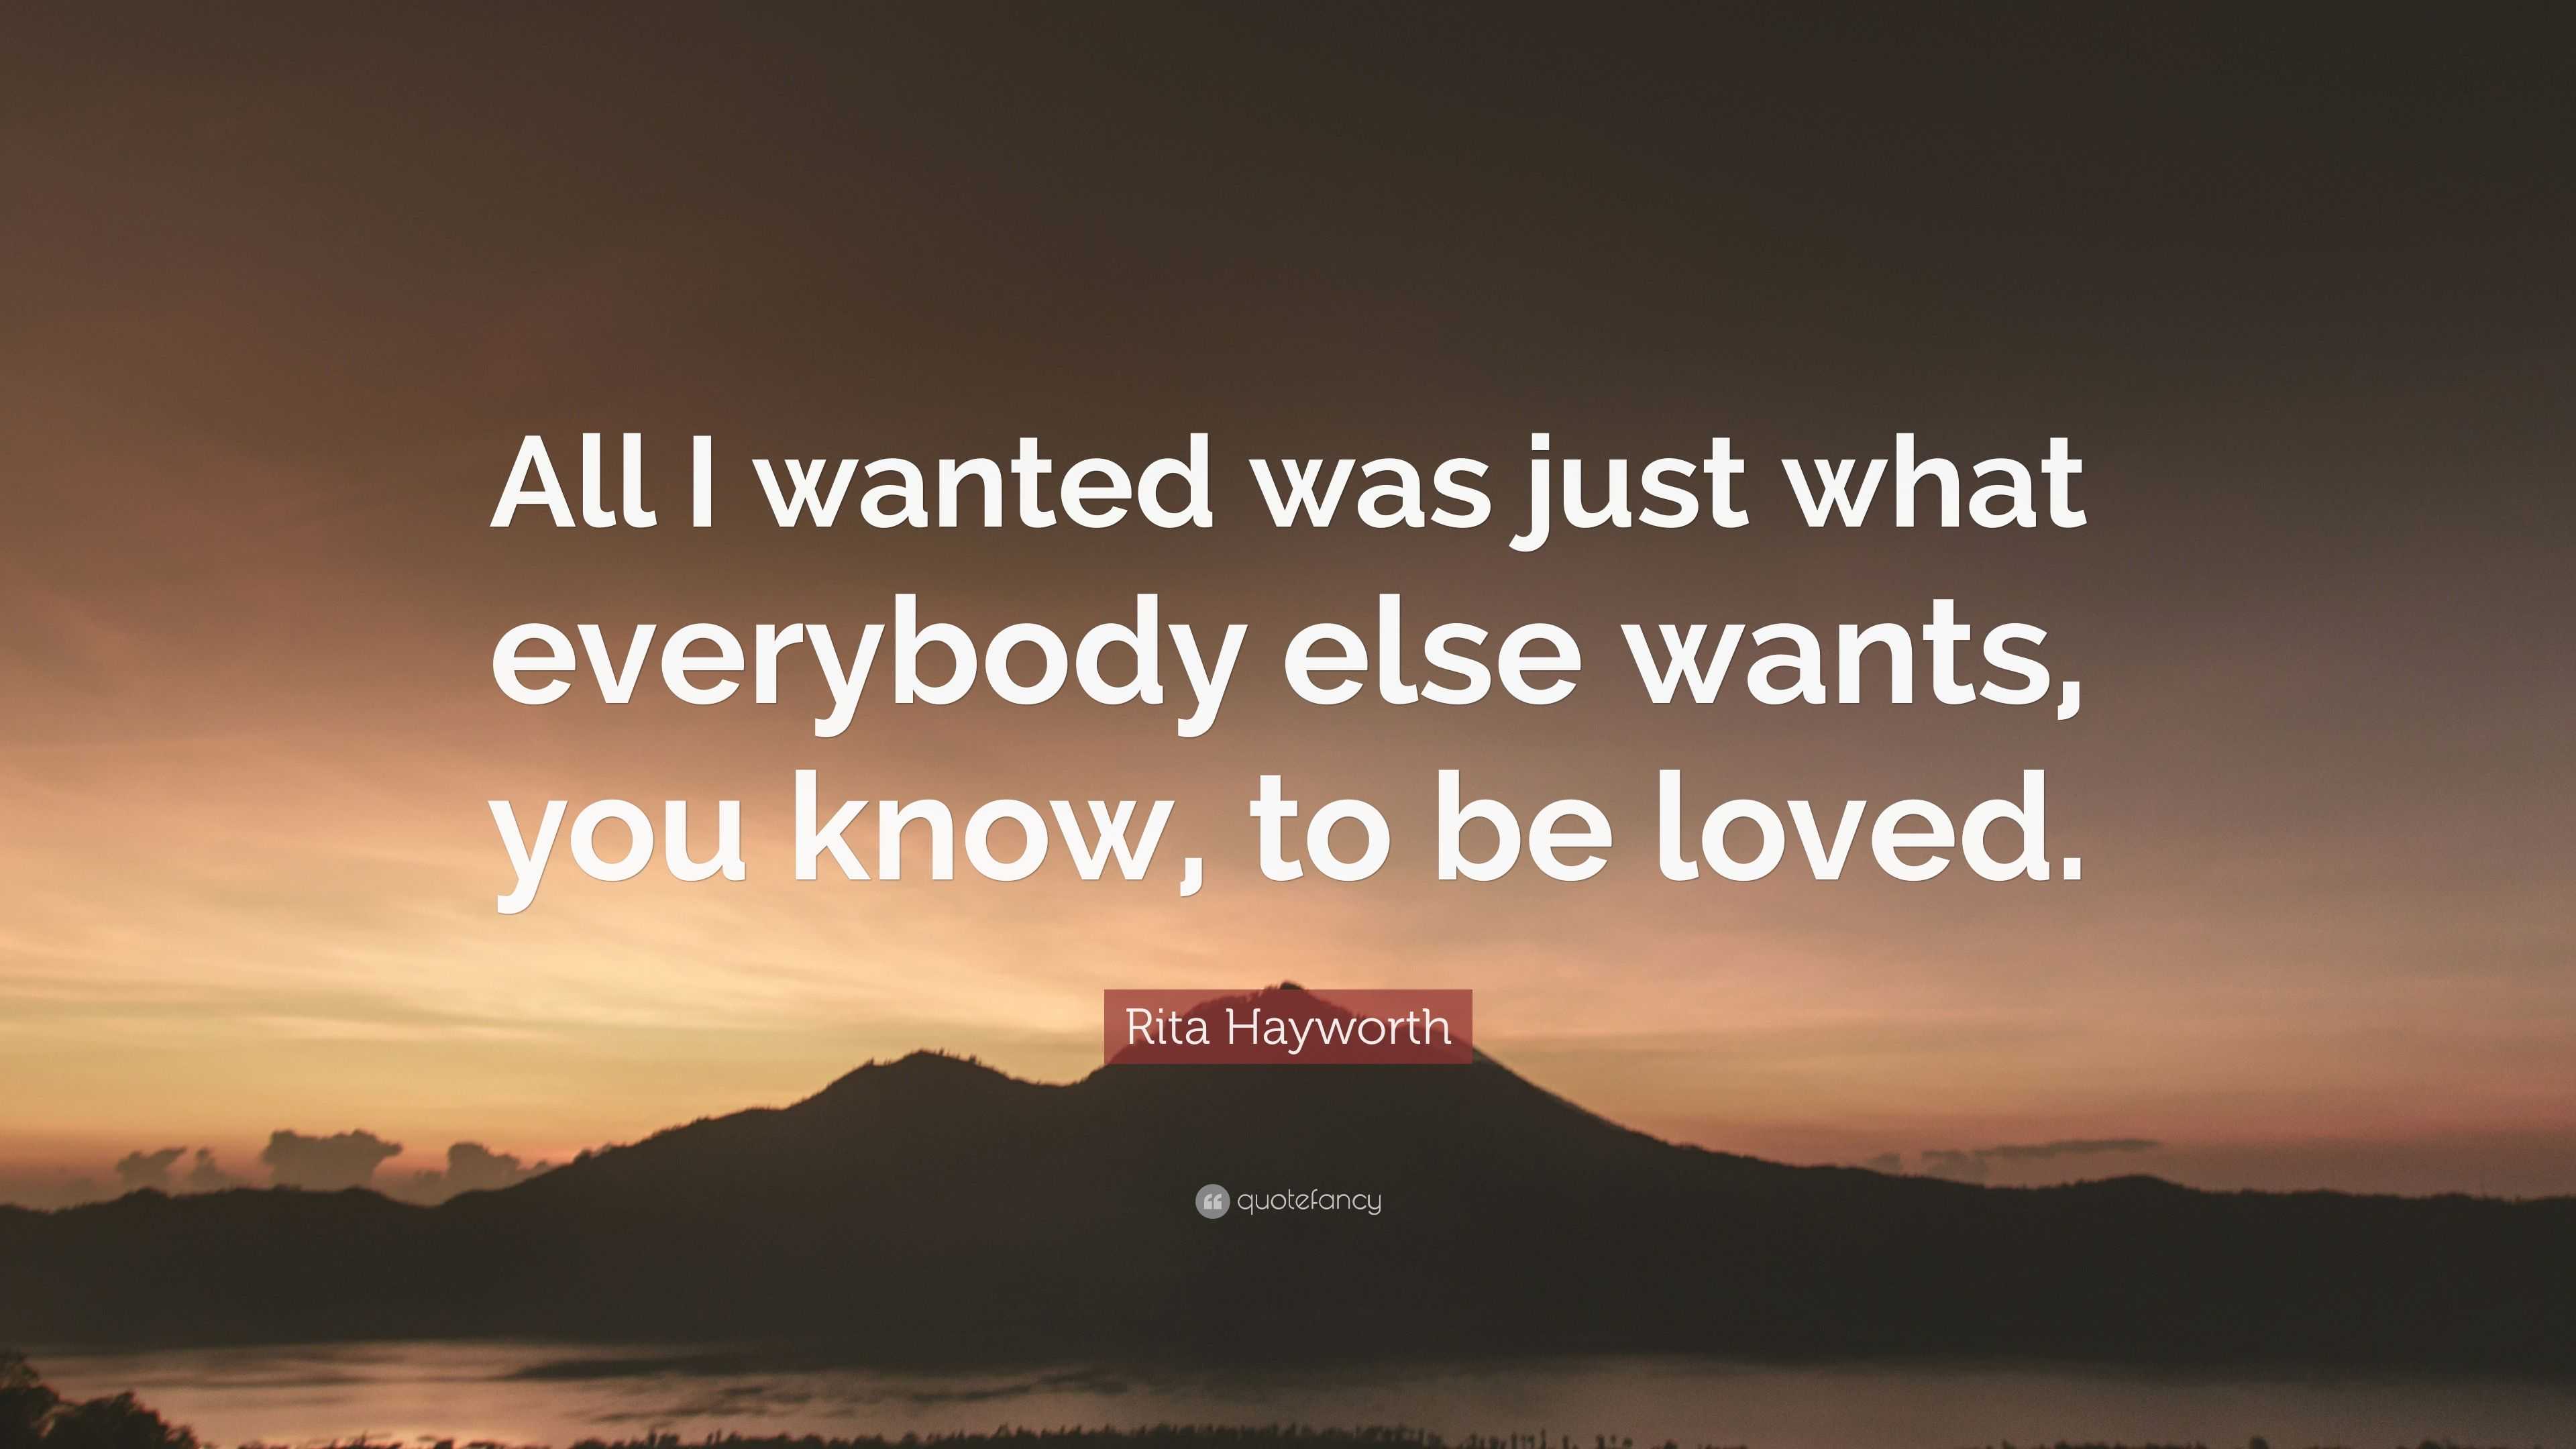 Rita Hayworth Quote: “All I wanted was just what everybody else wants ...